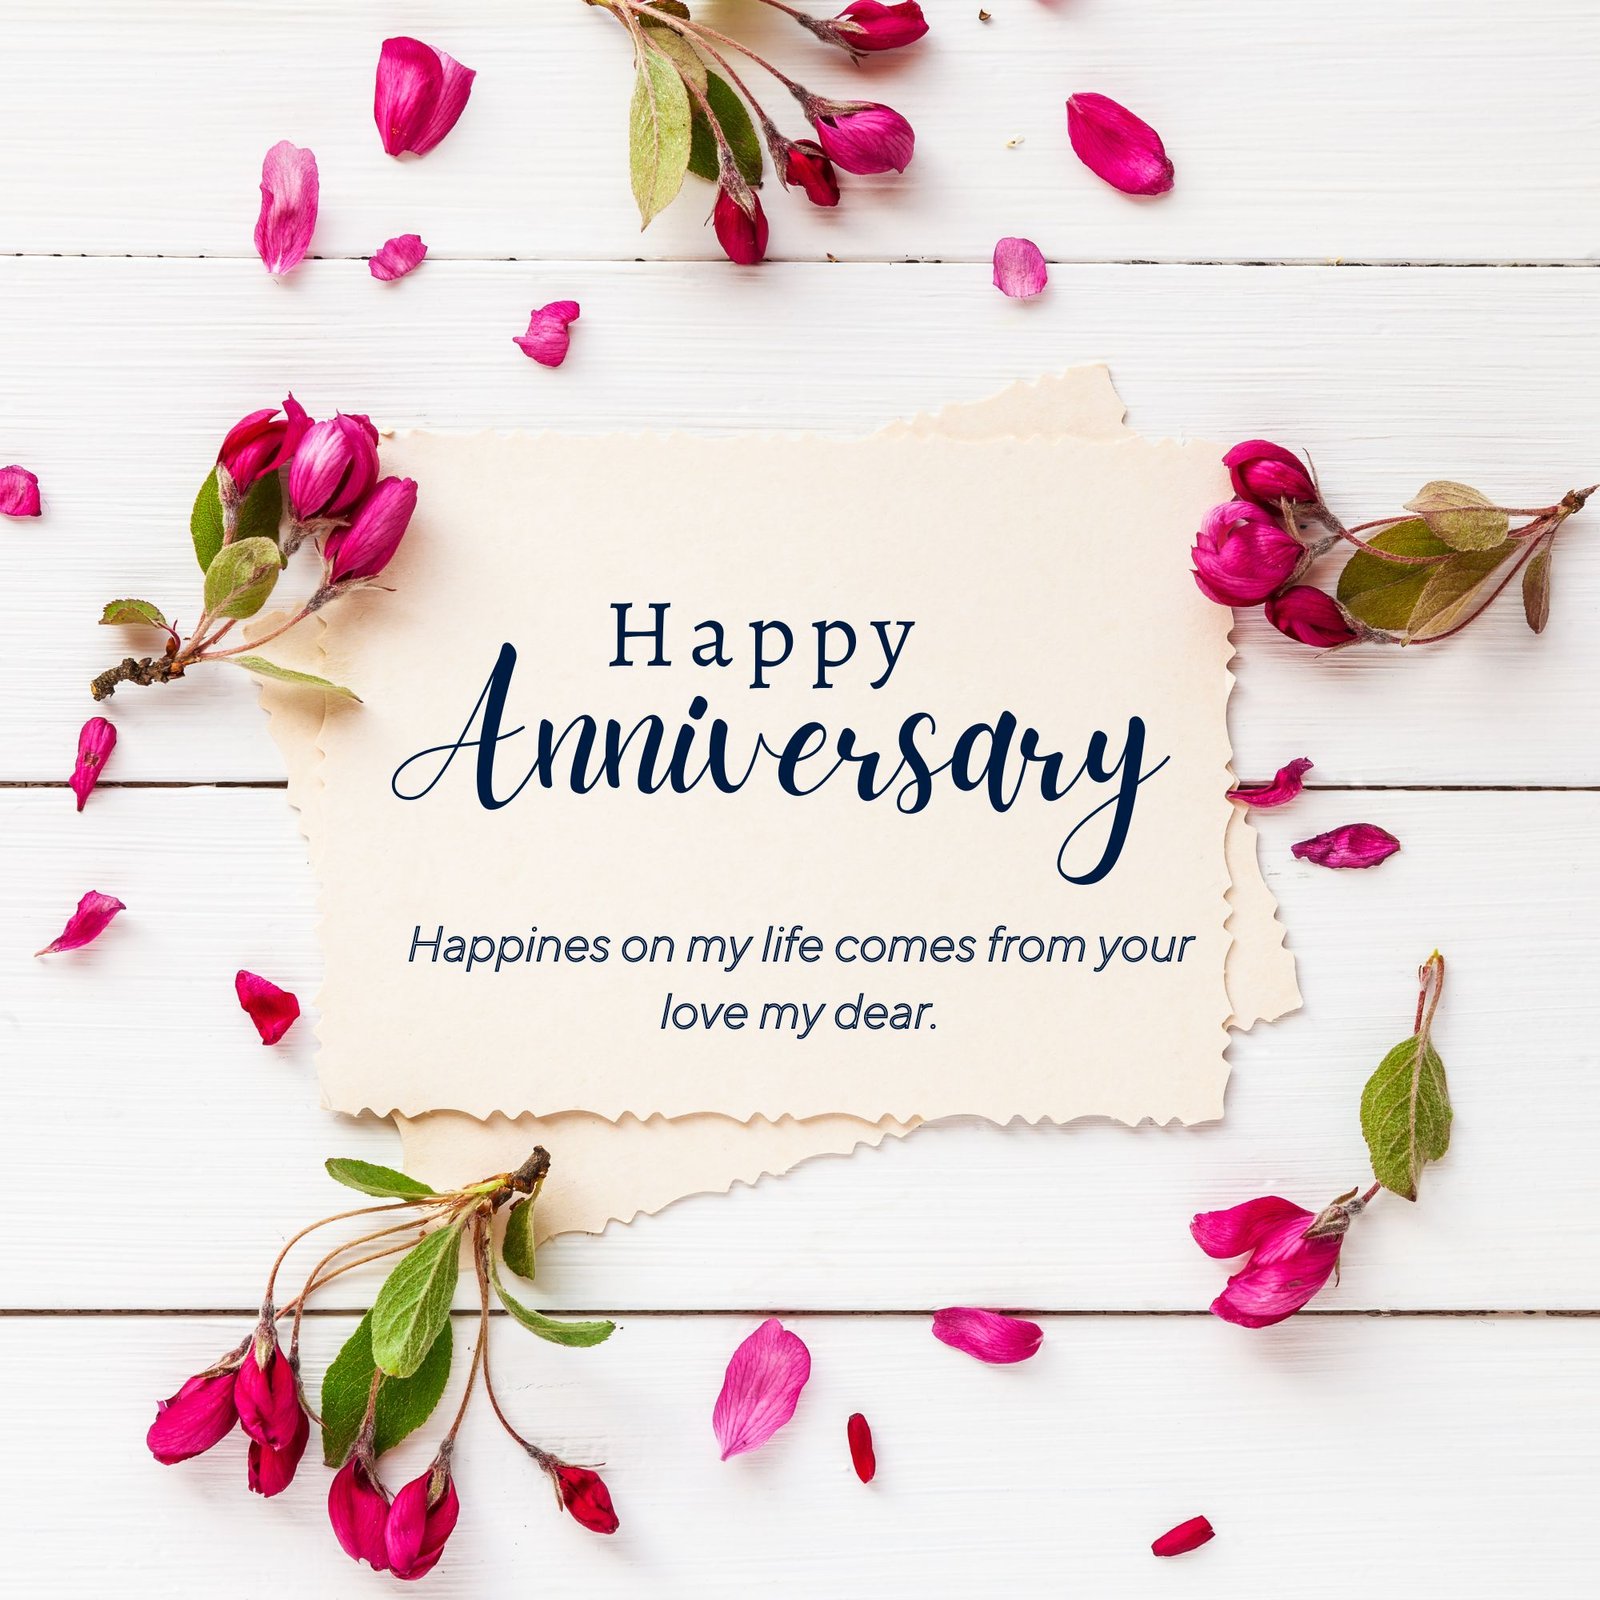 Happy Anniversary Images And Quotes